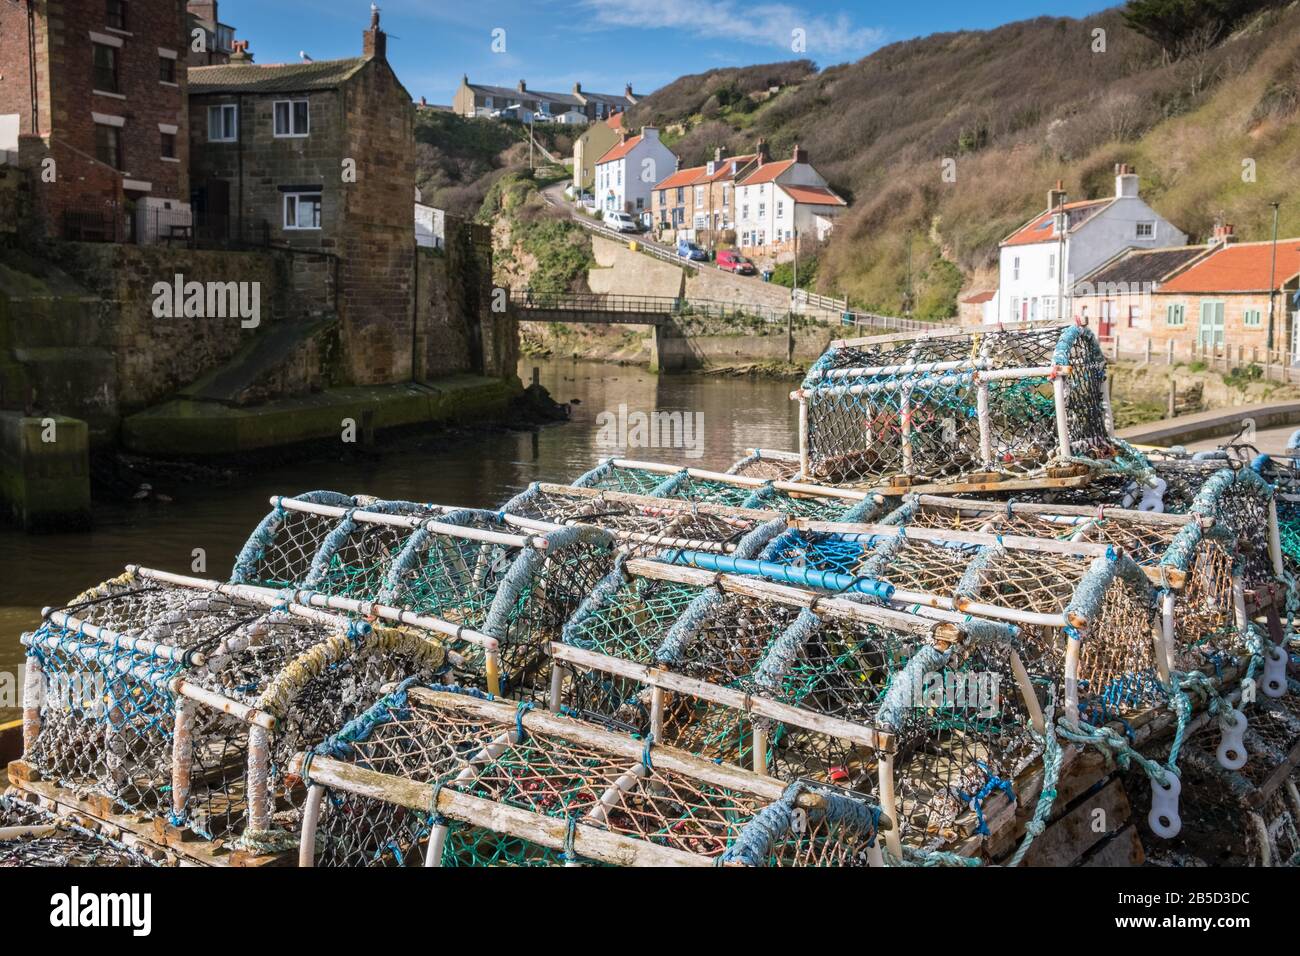 Staithes, North Yorkshire, UK, a traditional fishing village coastal harbour scene, with fishing pots in the foreground. Stock Photo